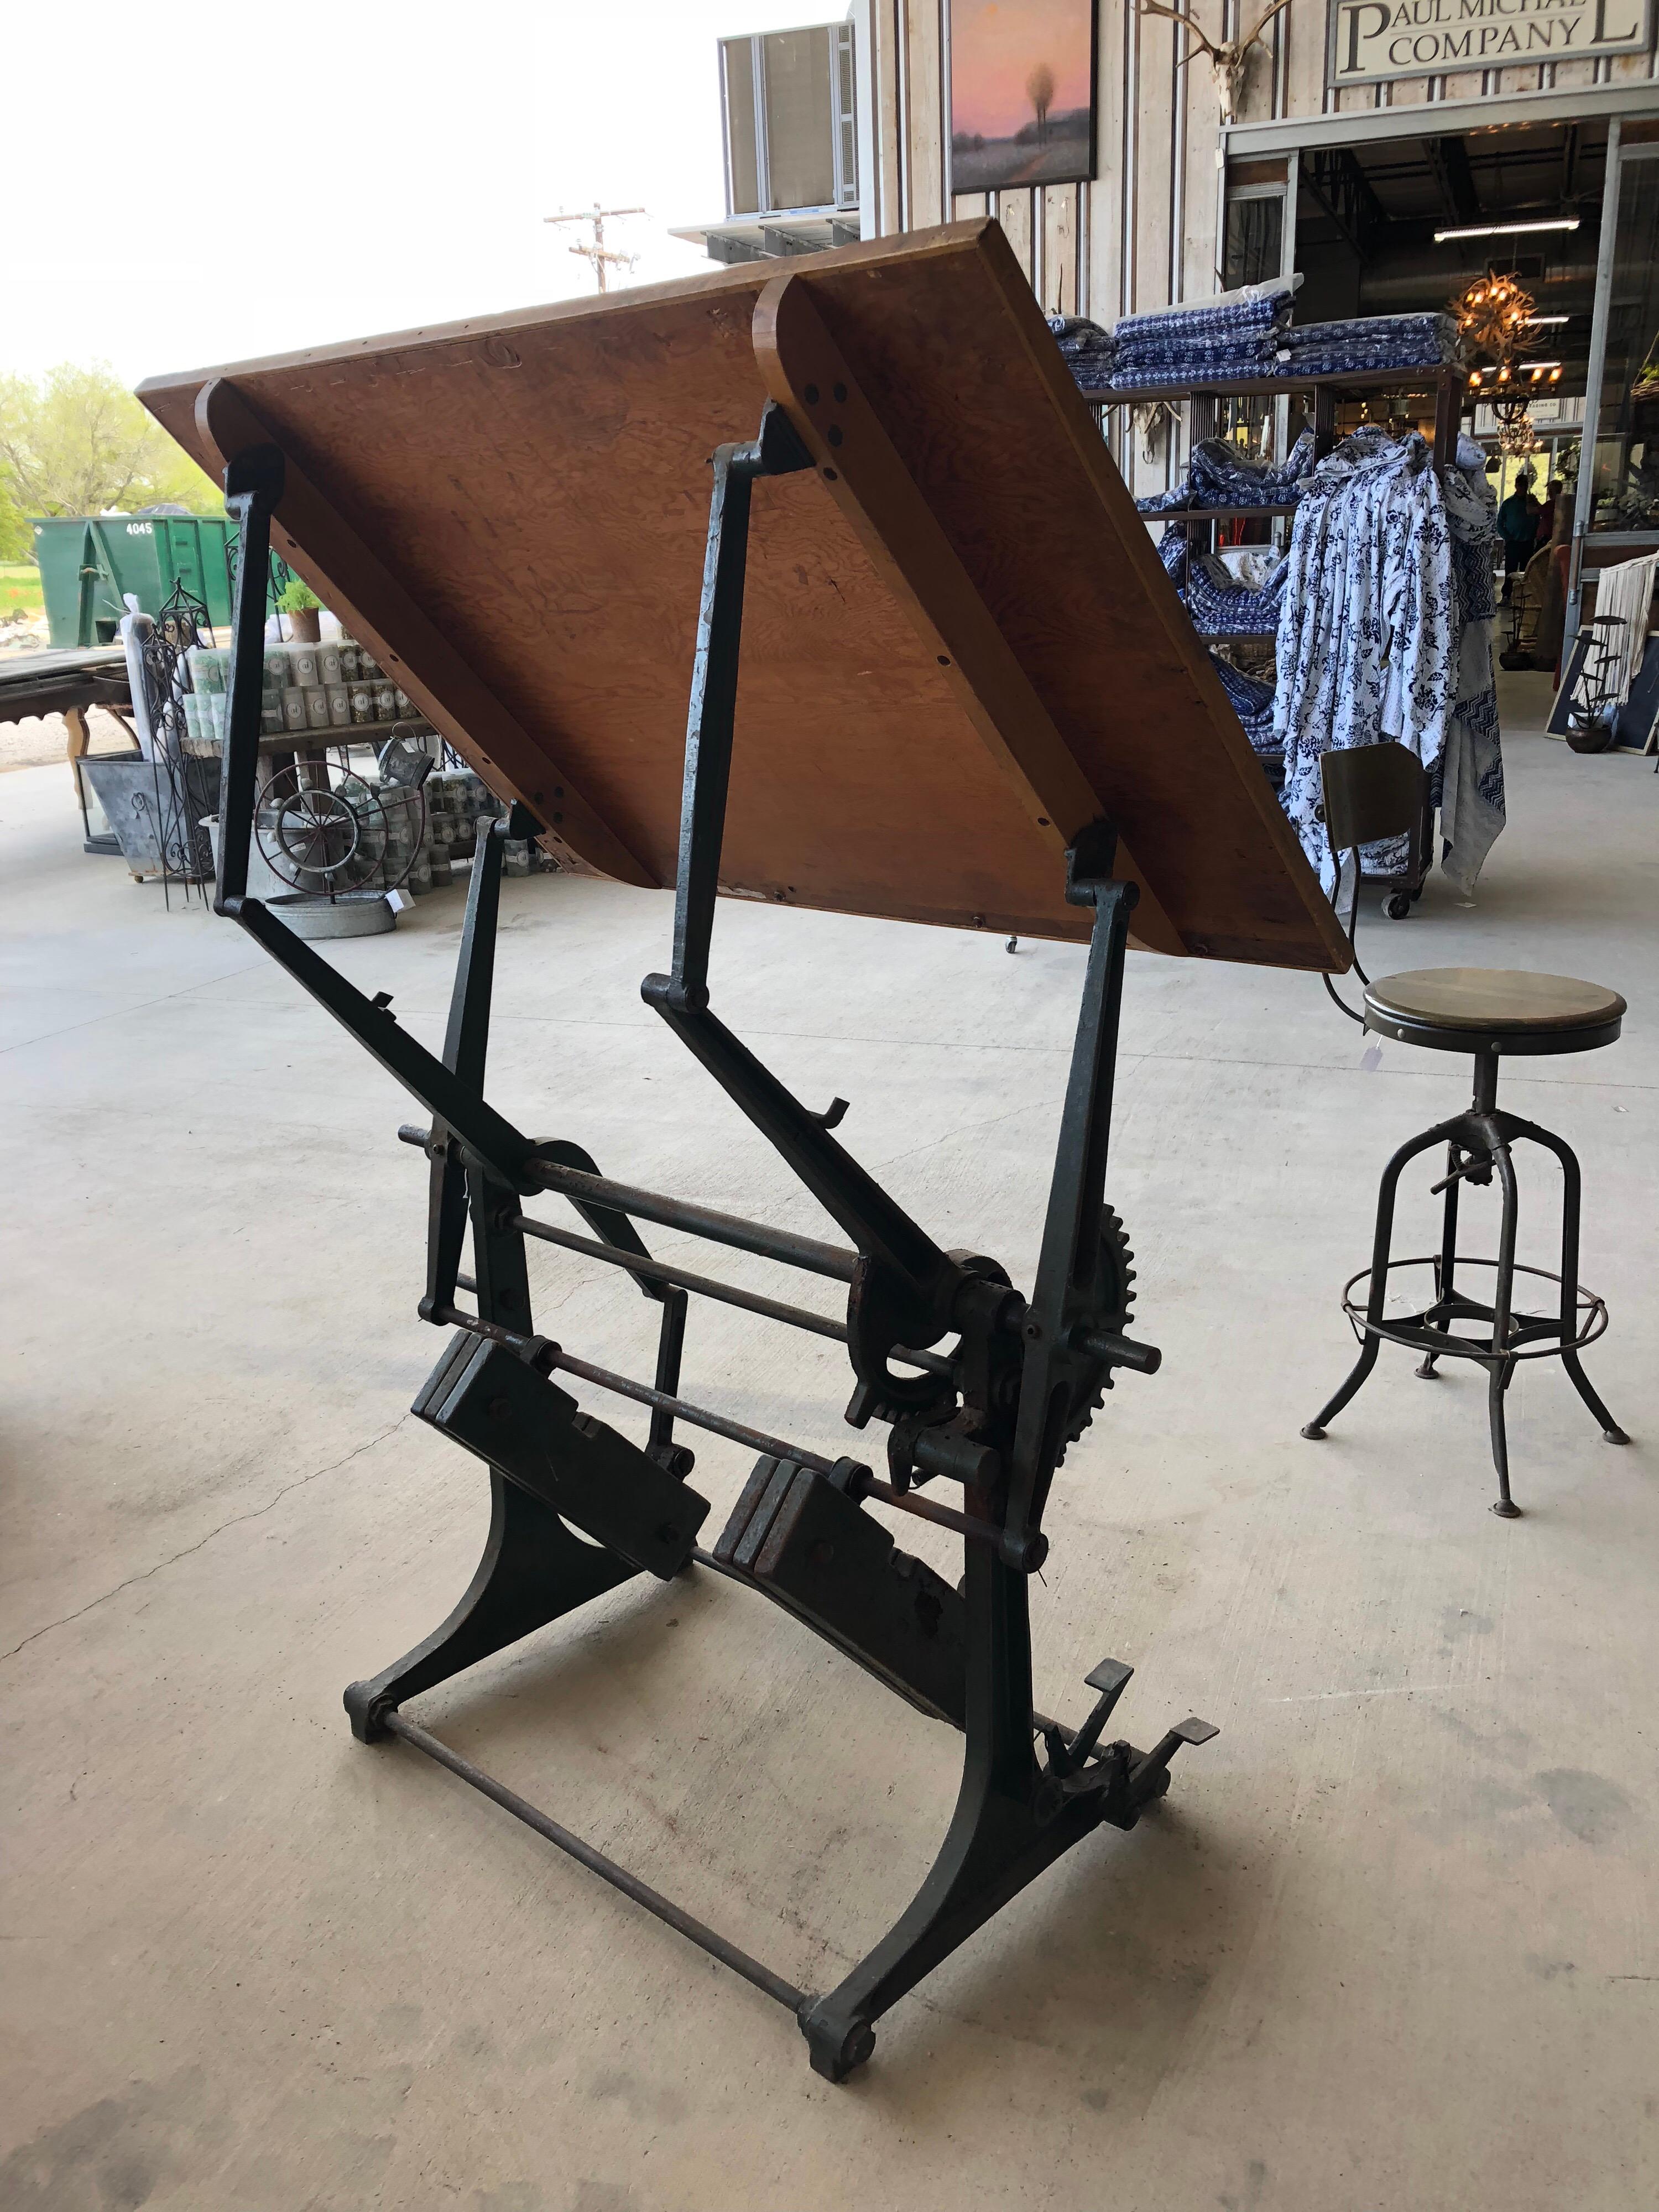 Antique drafting table by Jerome W. Hurych New York. Fully functional. Top 47.5” by 32.5”.